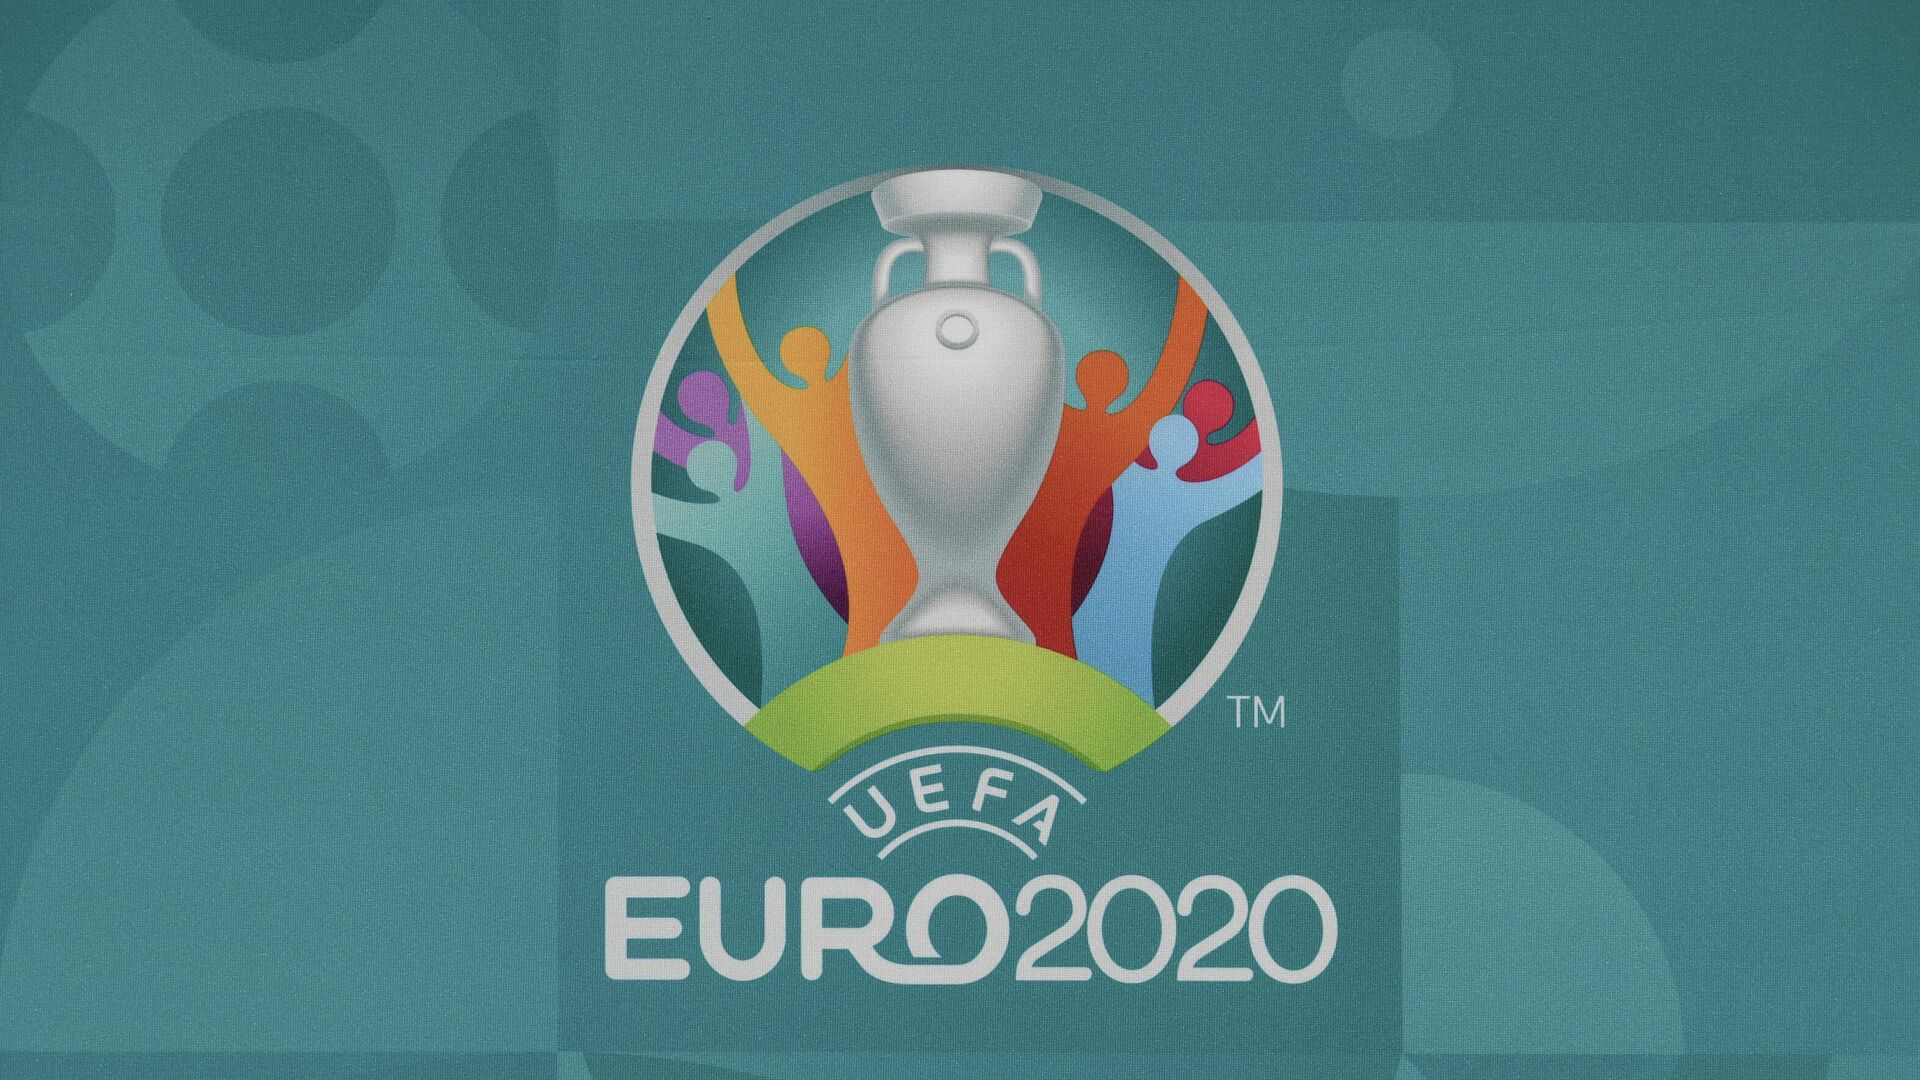 This picture taken on November 30, 2019, in Bucharest, Romania, shows the logo of the European Football Championship 2020 ahead of the UEFA Euro 2020 Final Draw Ceremony. - Bucharest will host the UEFA Euro 2020 draw on November 30, 2019 and host matches in the summer tournament but doubts have arisen on the progress of the construction work. (Photo by Fabrice COFFRINI / AFP) - РИА Новости, 1920, 02.03.2021